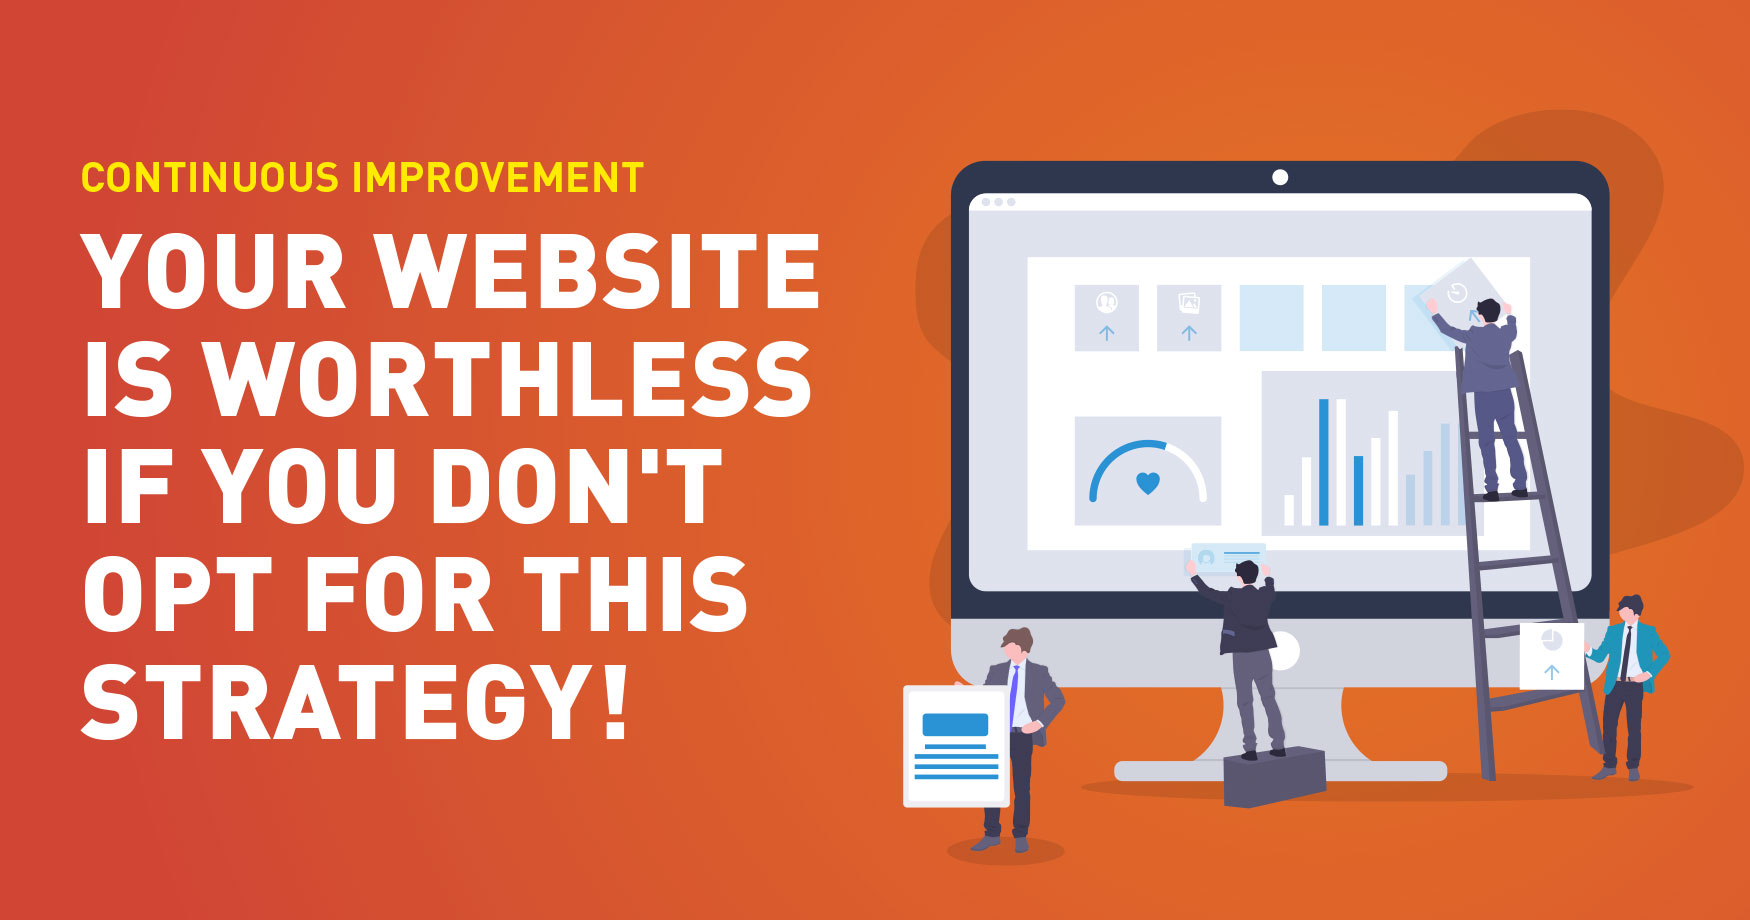 Continuous Improvement - Your website will become worthless if you don't opt for this strategy!